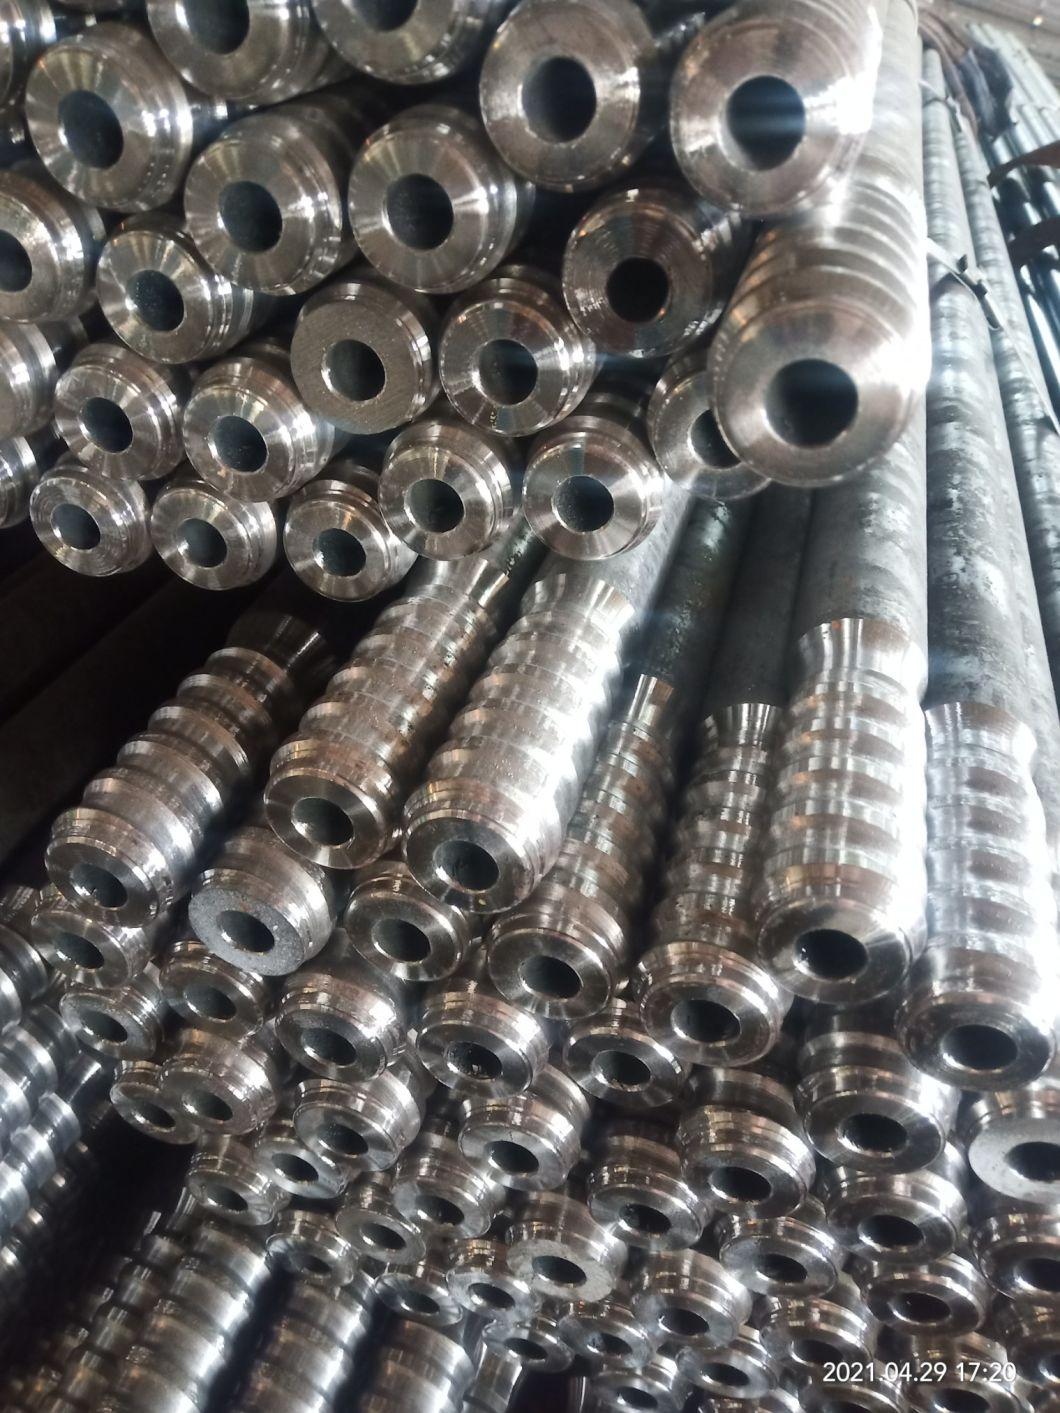 38mm Blast Furnace Drill Pipe Independent Manufacturer Factory Spot and Can Be Customized